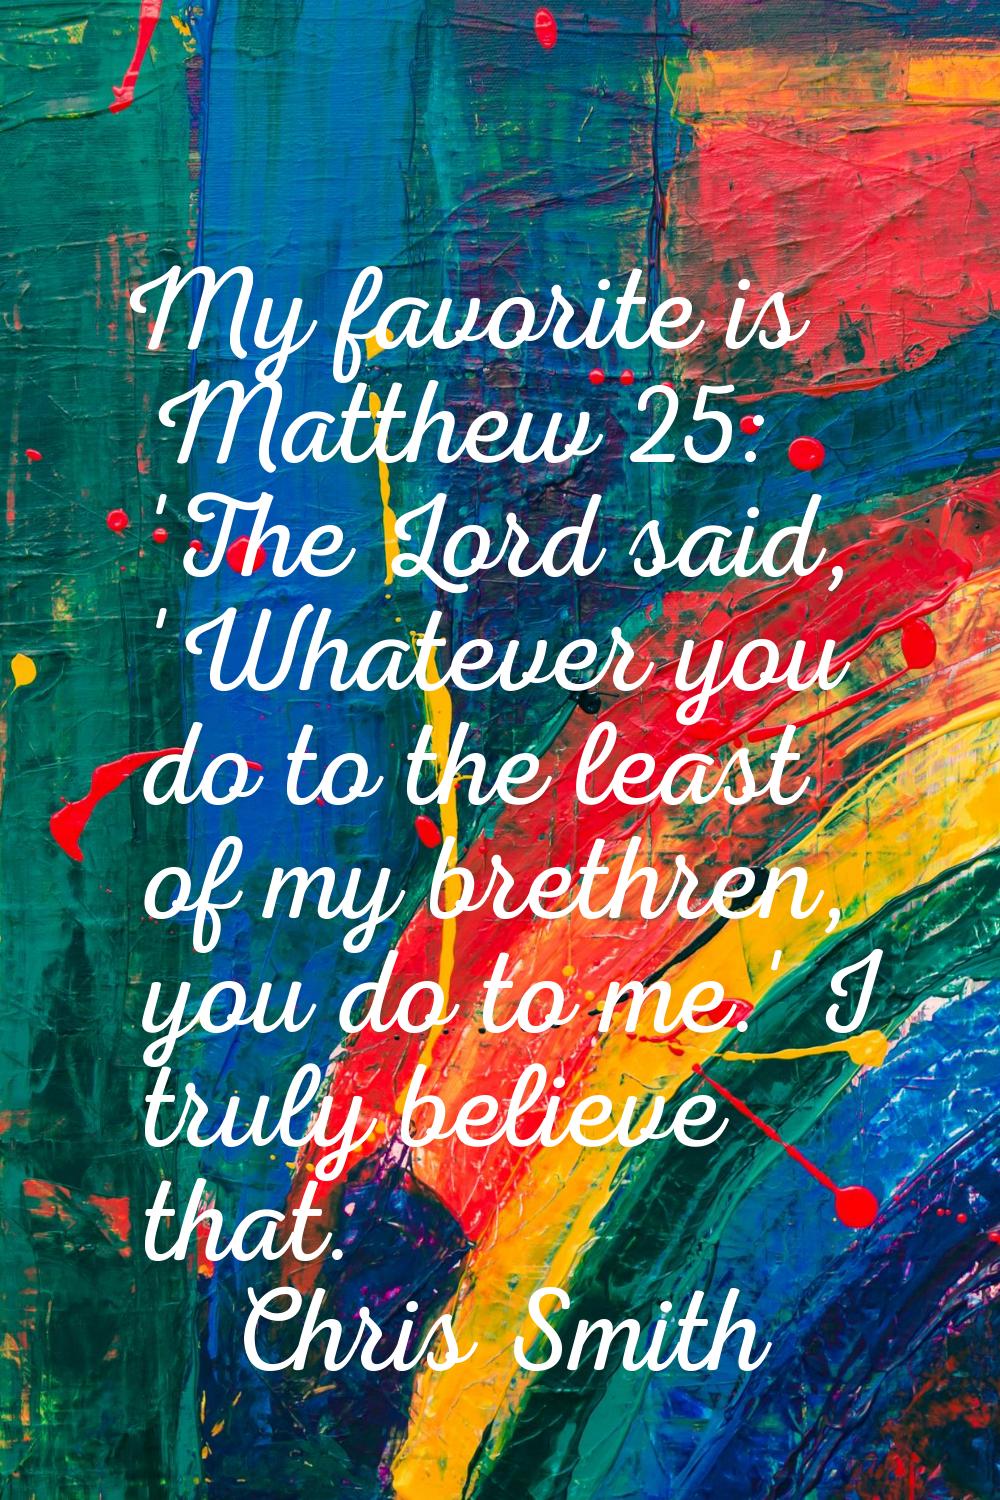 My favorite is Matthew 25: 'The Lord said, 'Whatever you do to the least of my brethren, you do to 